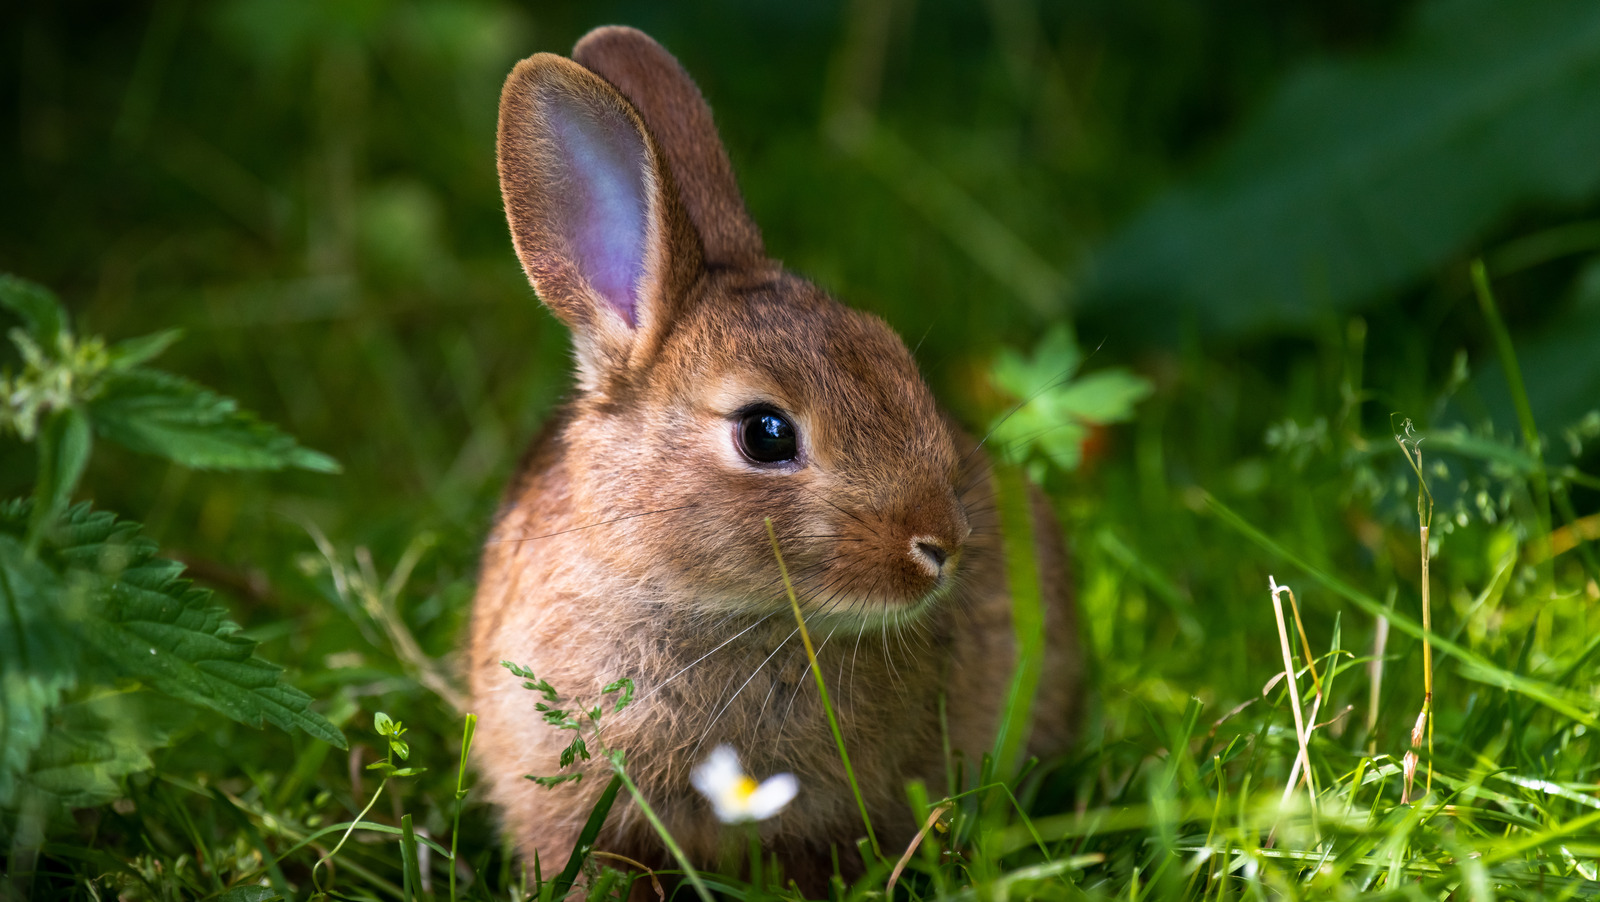 How To Keep Rabbits From Destroying Your Garden